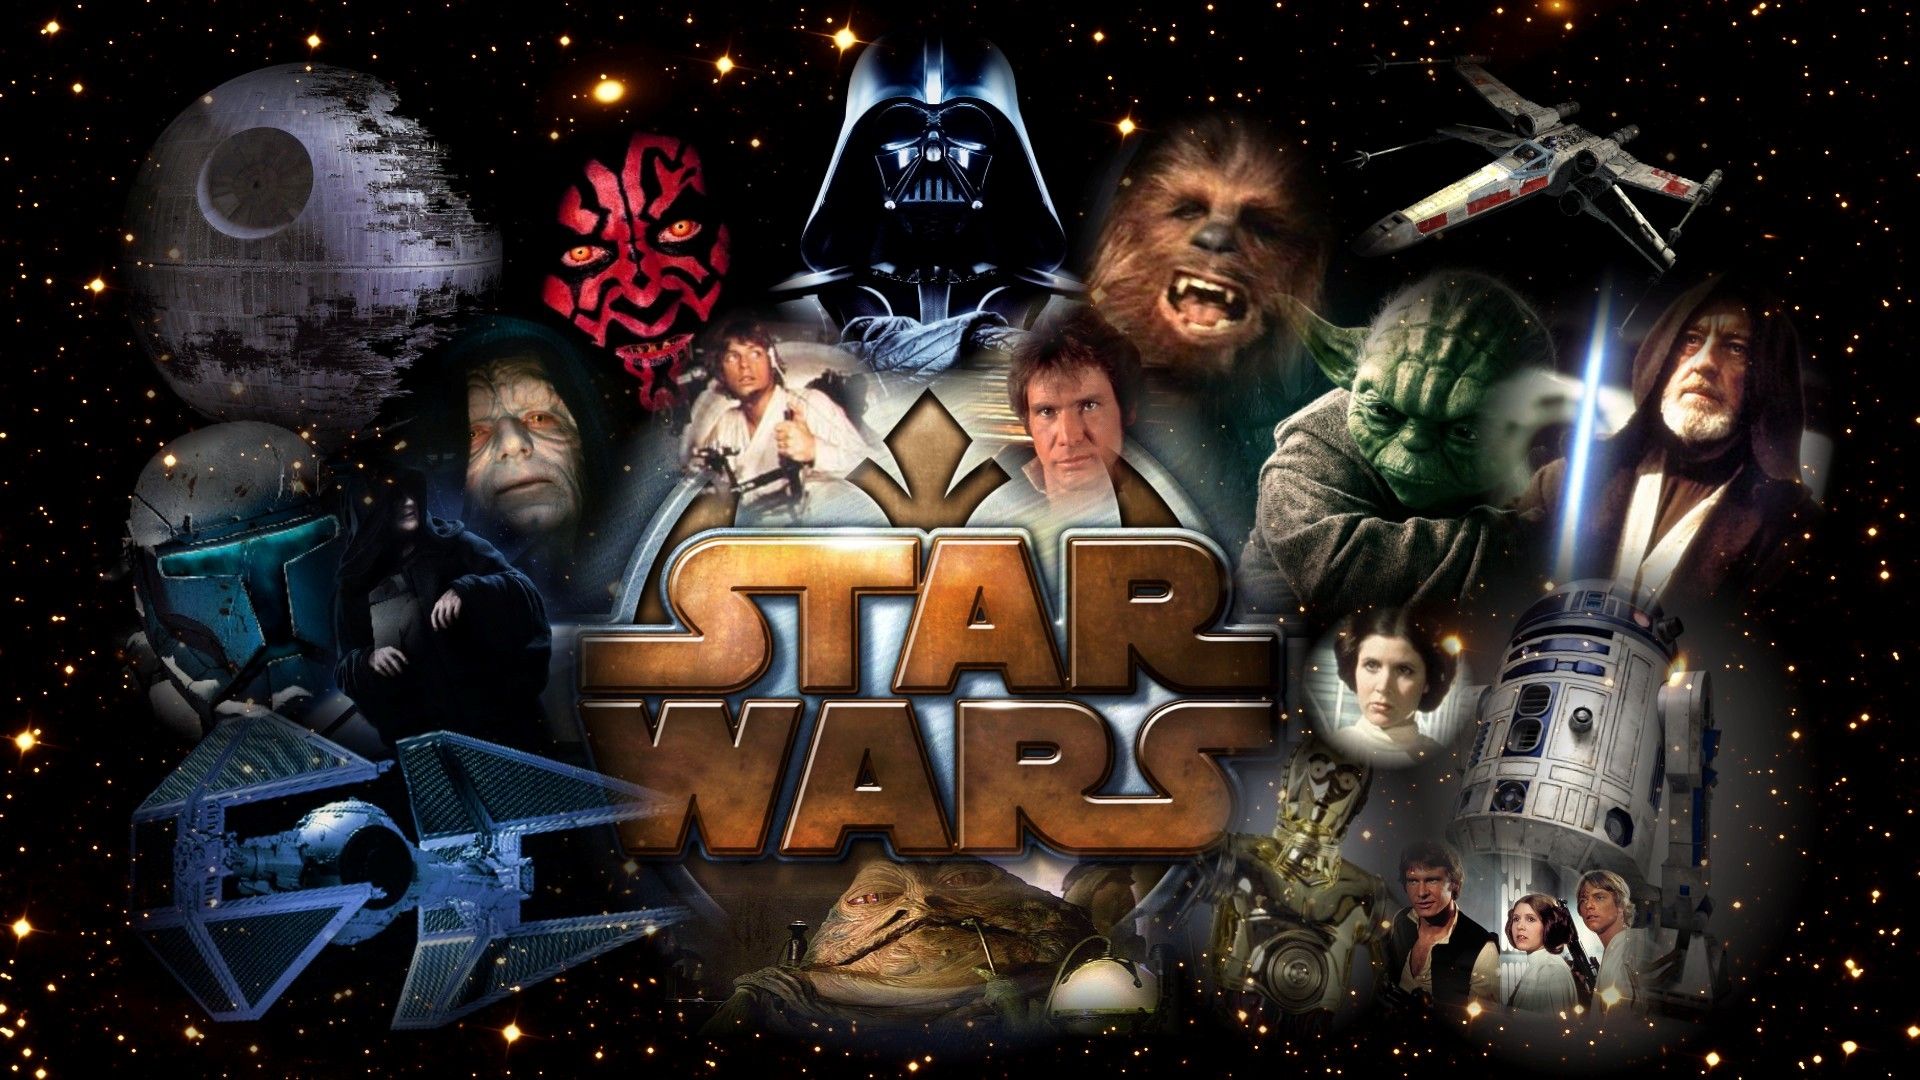 Star Wars Prequel Trilogy Characters Wallpapers - Wallpaper Cave Star Wars Star Background